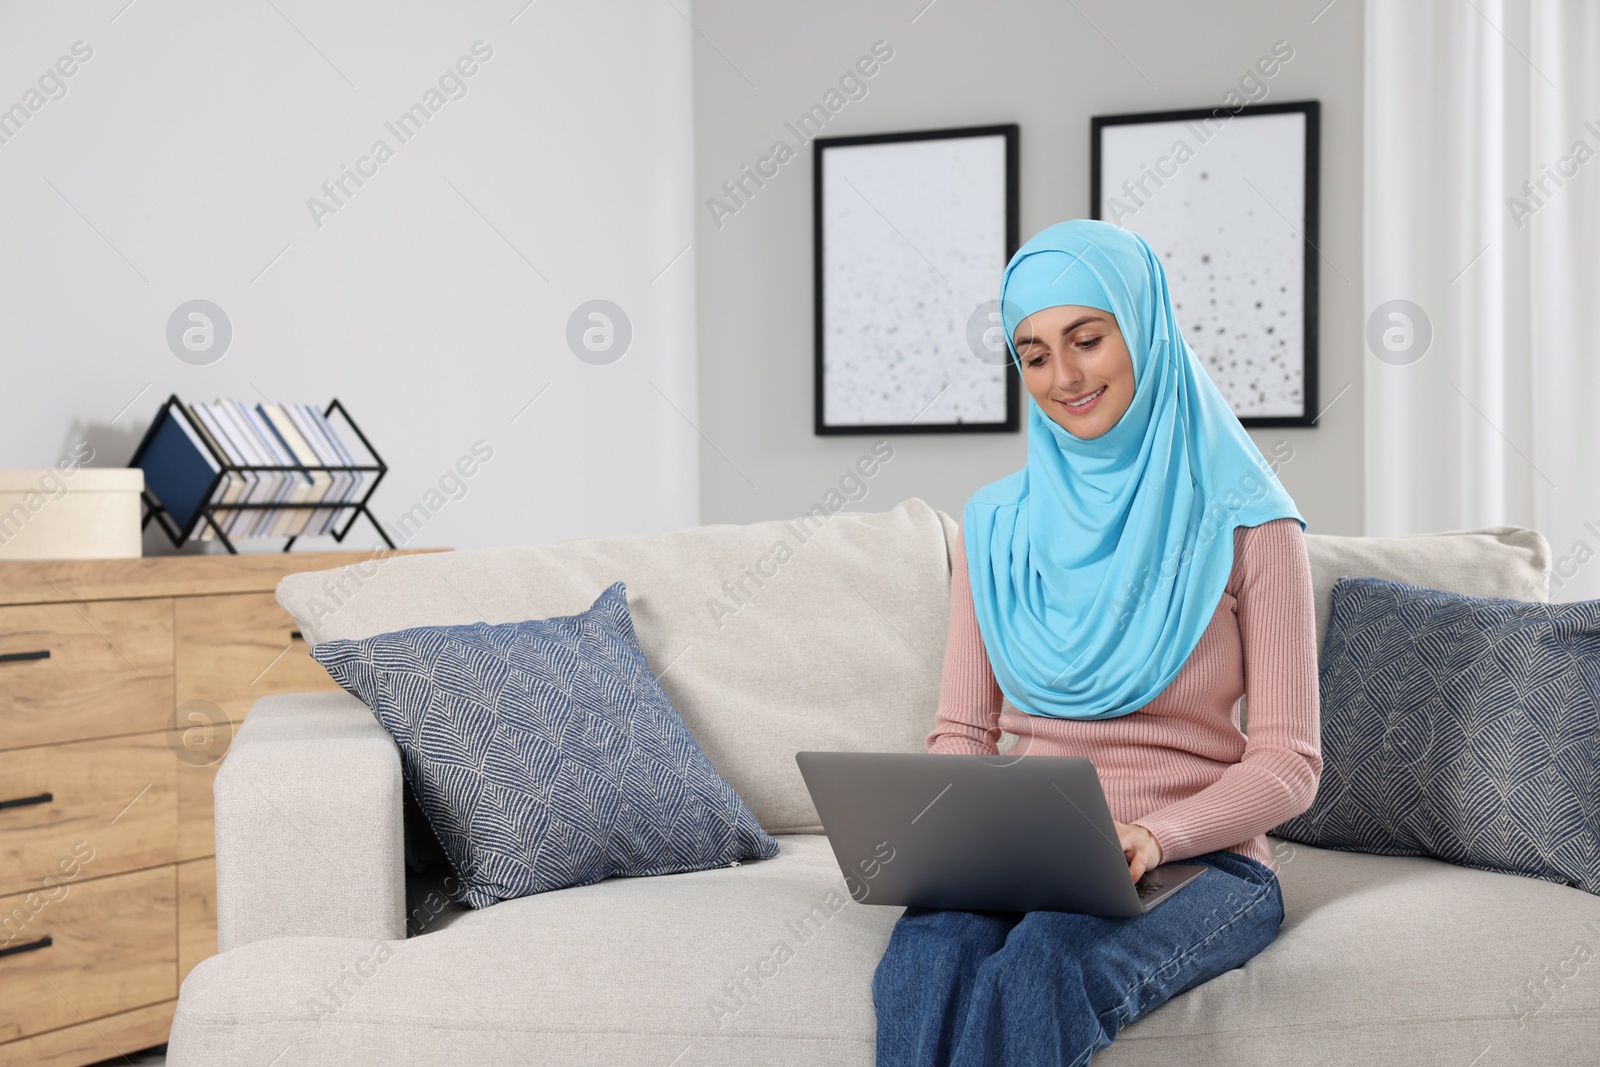 Photo of Muslim woman using laptop at couch in room. Space for text